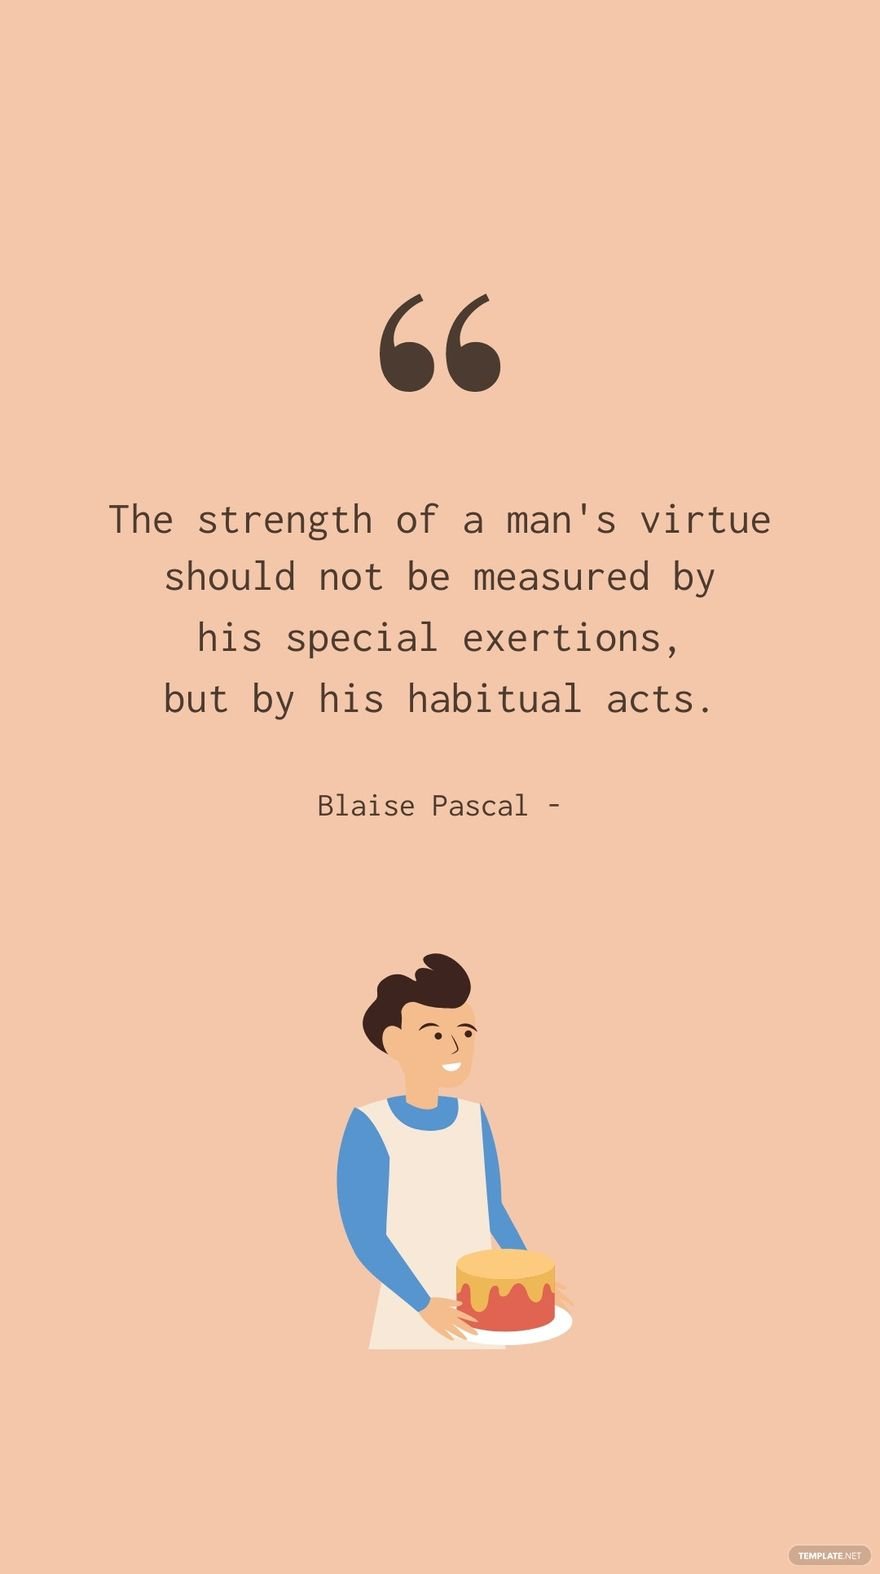 Blaise Pascal - The strength of a man's virtue should not be measured by his special exertions, but by his habitual acts.